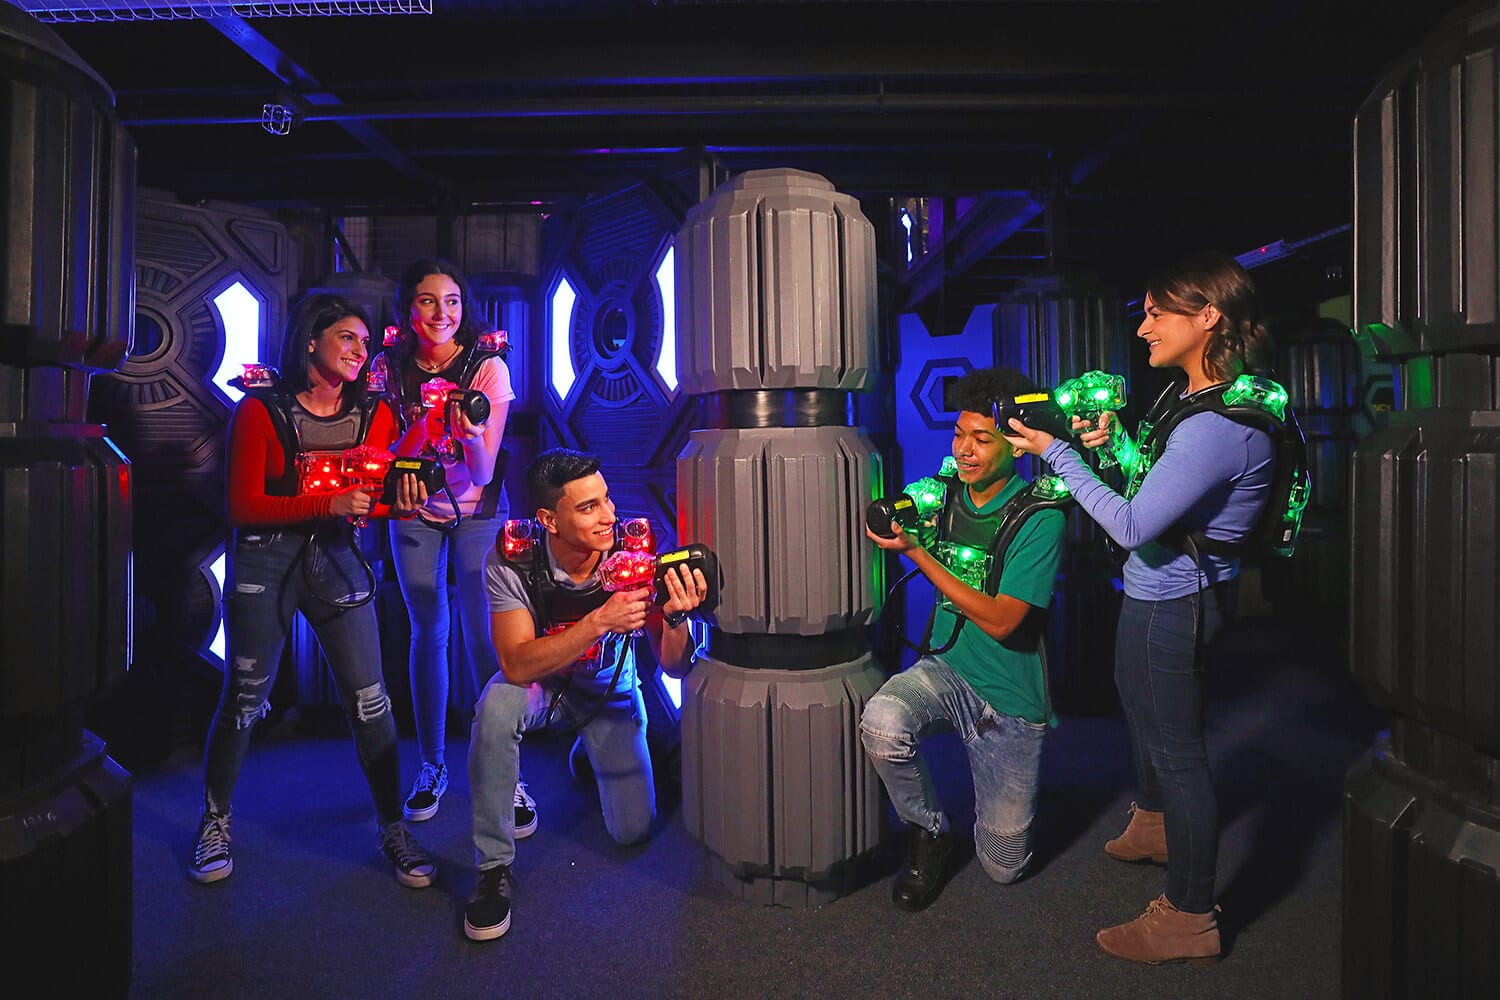 Two-Level Laser Tag - Laser Tag for Adults and Kids - iPlay America